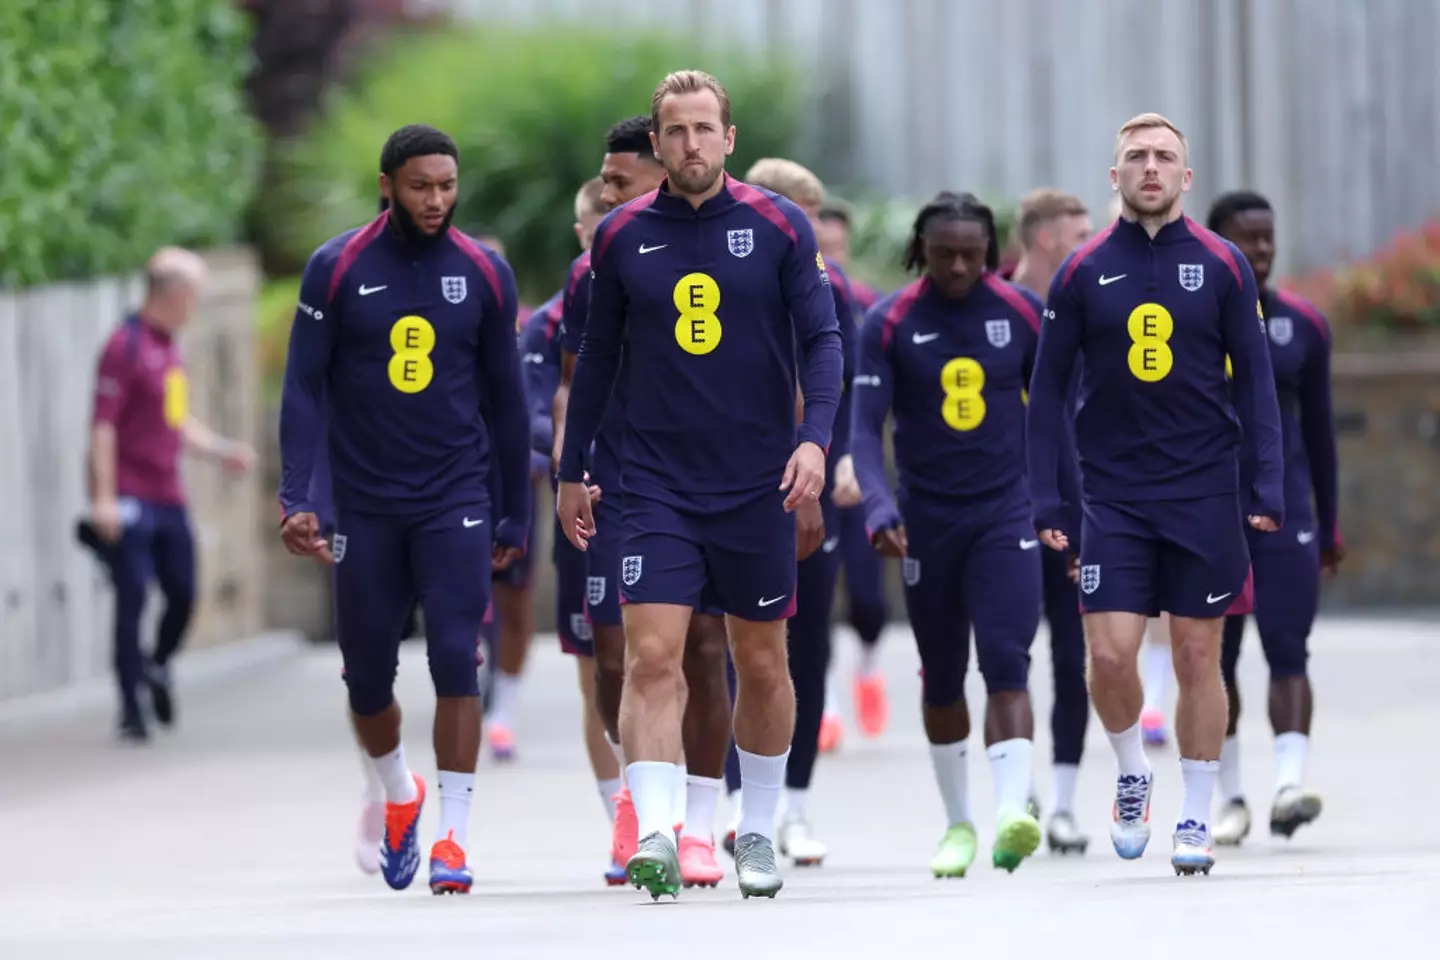 Harry Kane and teammates walk to a training session at Tottenham Hotspur Training Centre. (Eddie Keogh/The FA/Getty Images)